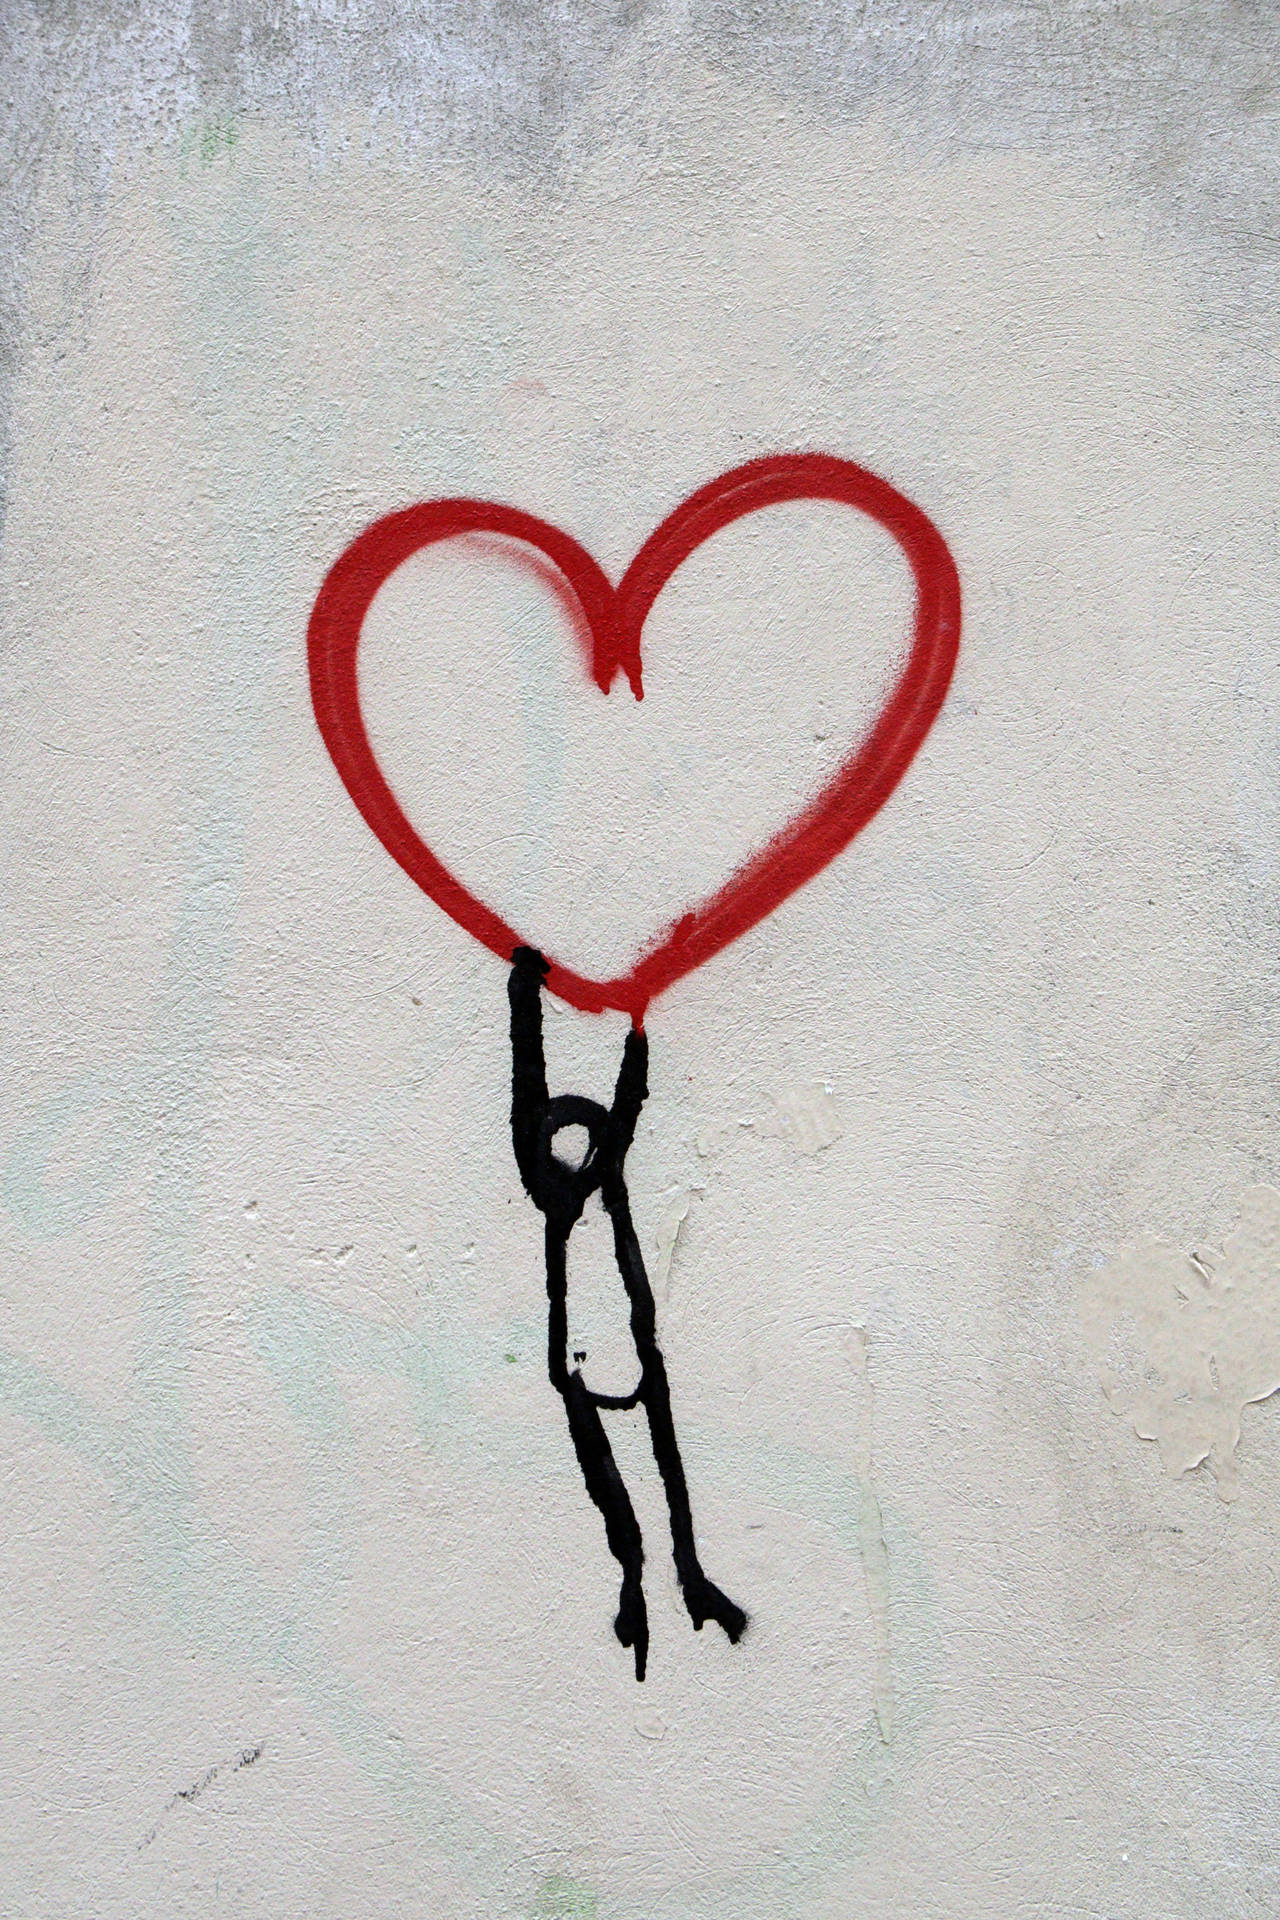 Minimalist art of tiny black stick man holding onto a big red heart made of string.